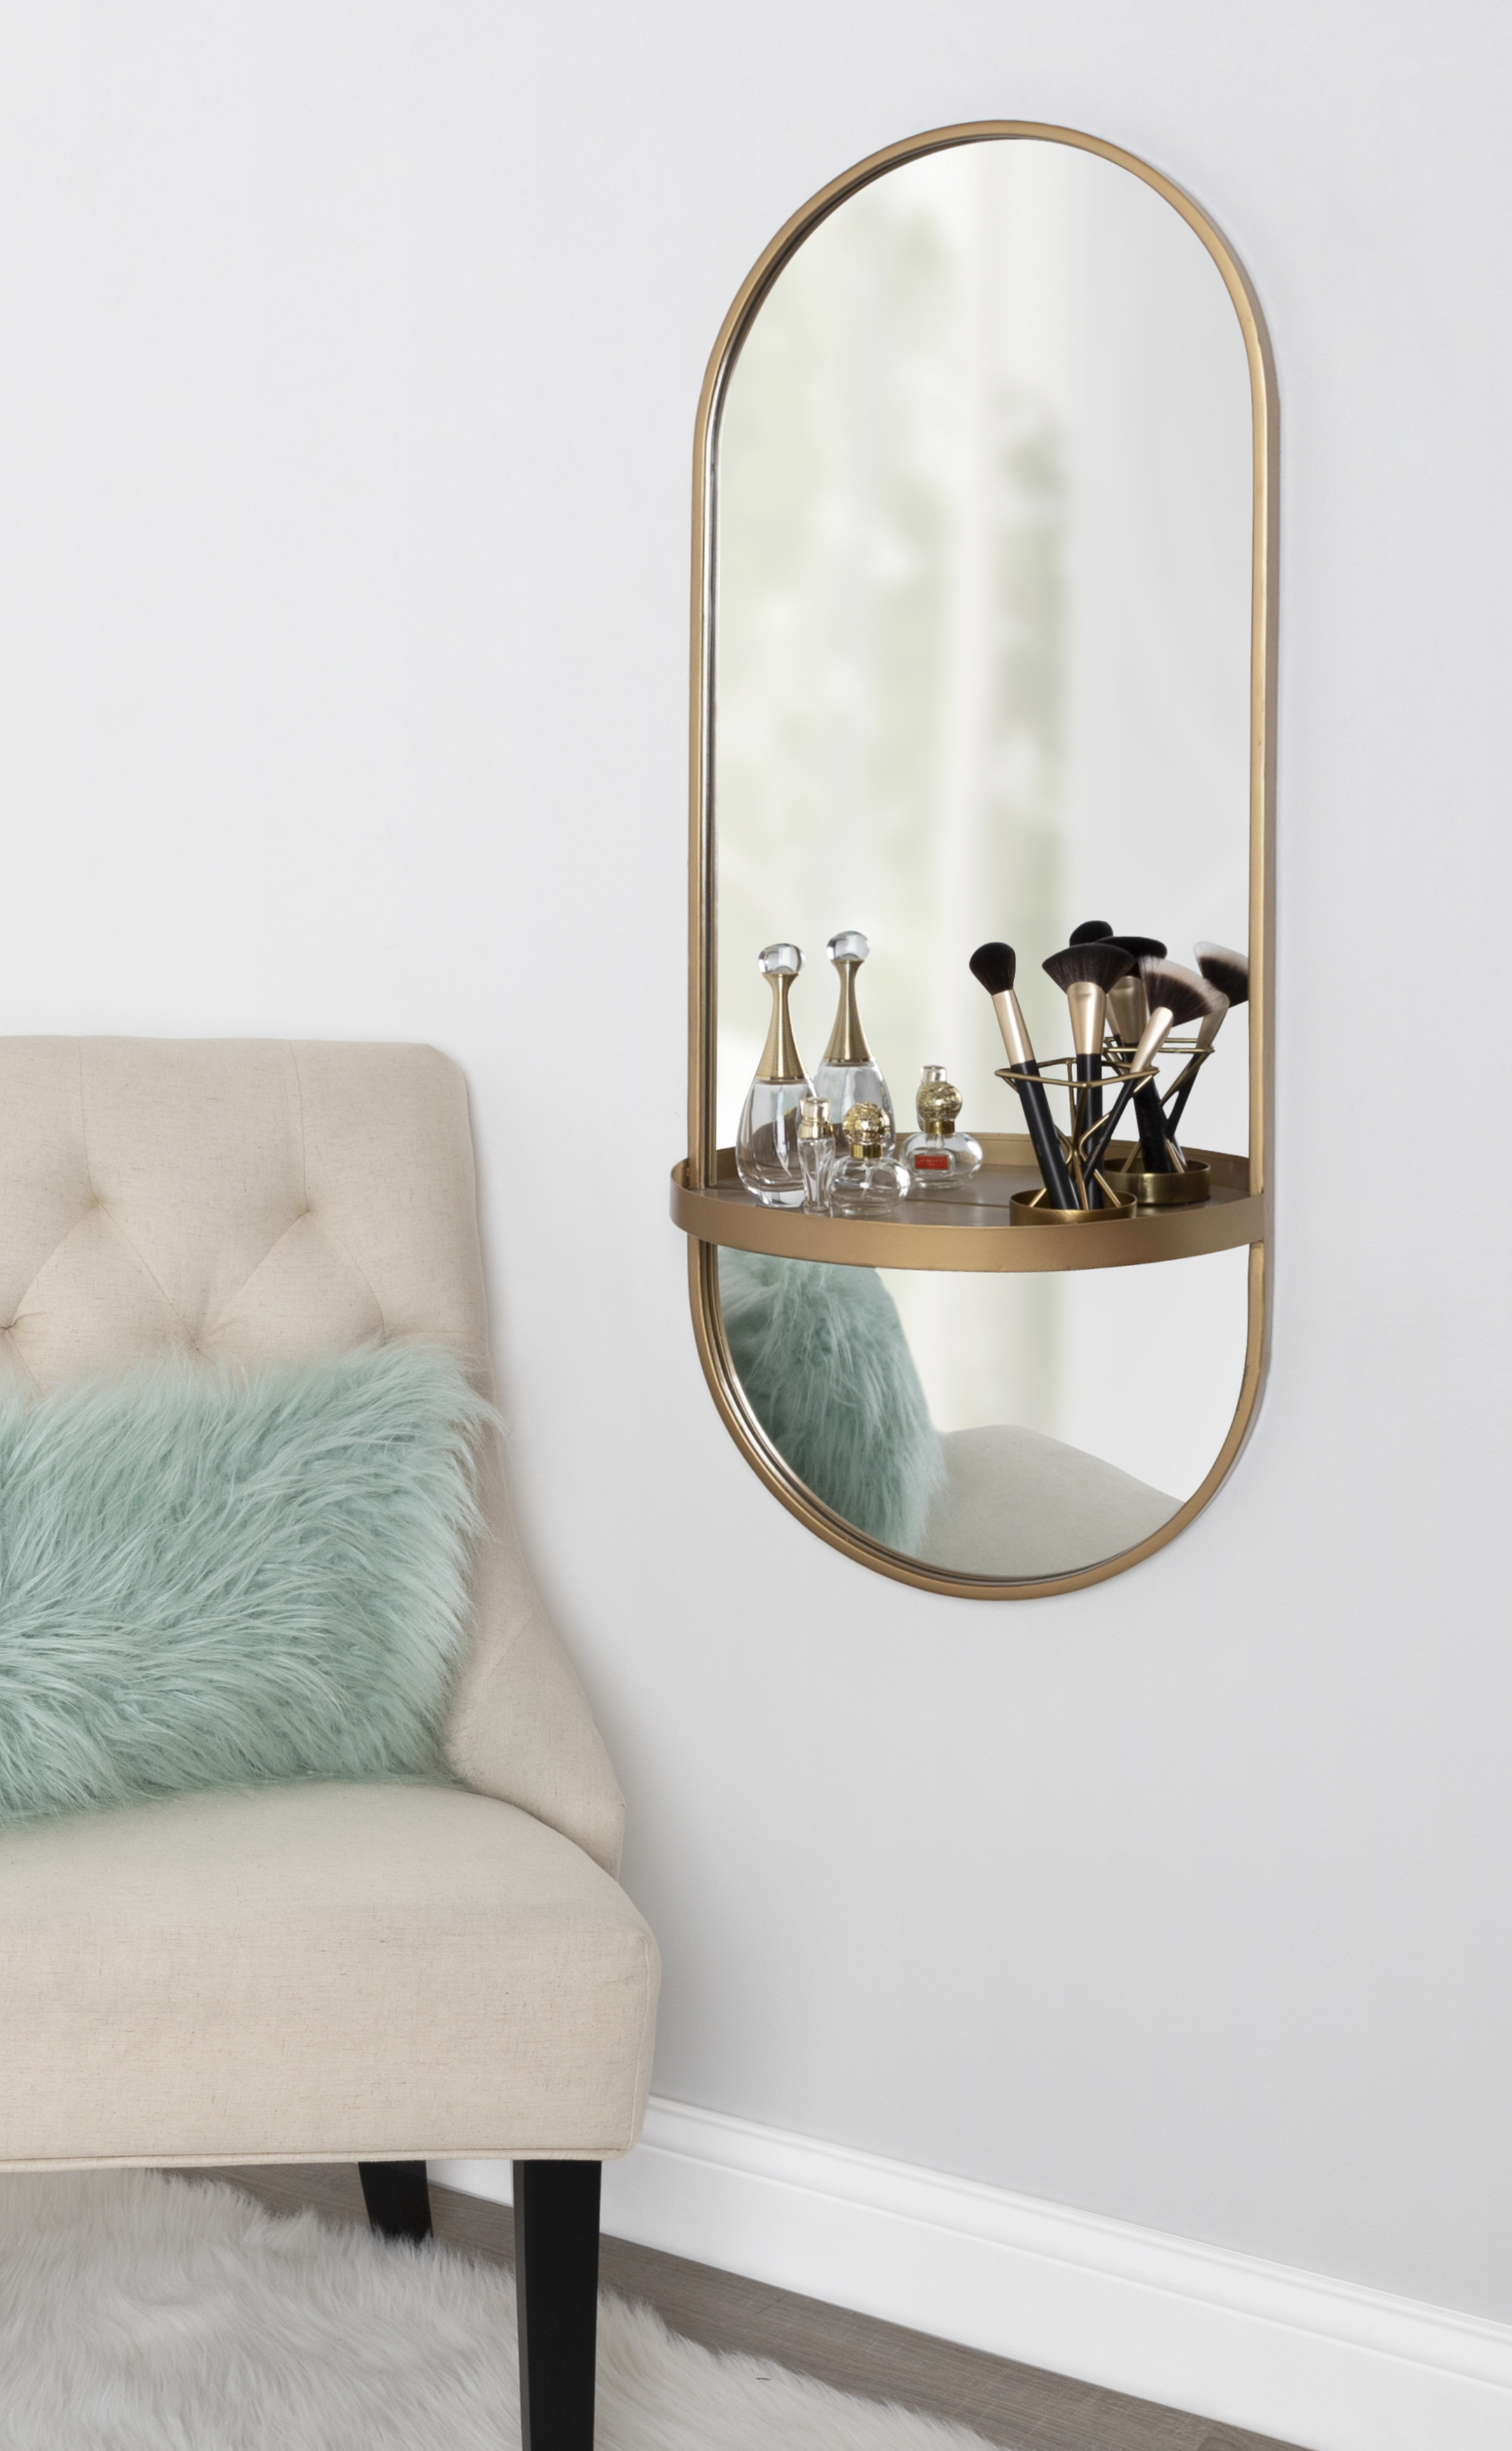 Kate and Laurel Estero Glam Metal Framed Capsule Wall Mirror with Shelf, 16  x 38, Gold, Chic Modern Wall Accent